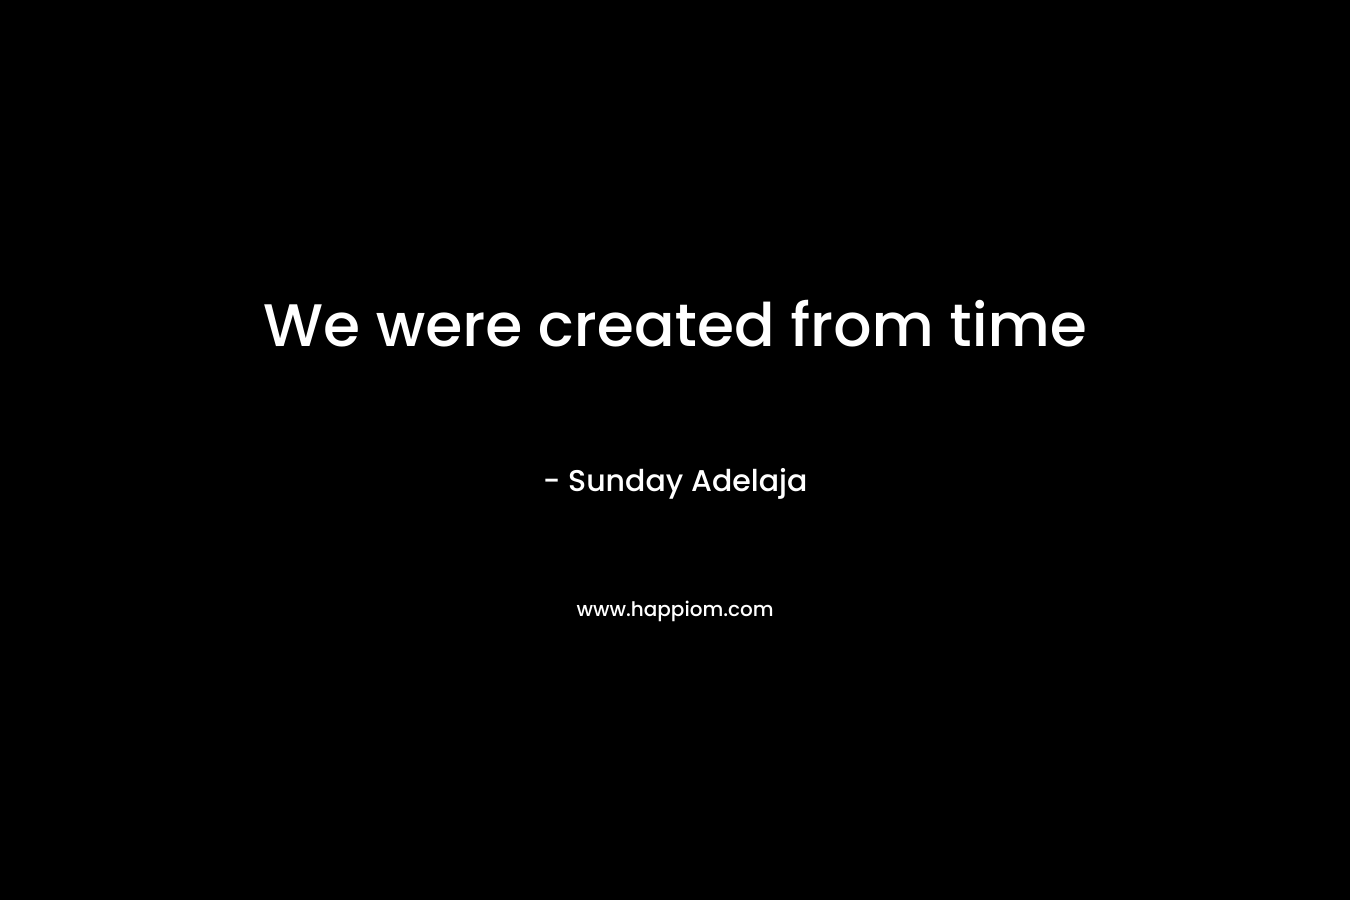 We were created from time